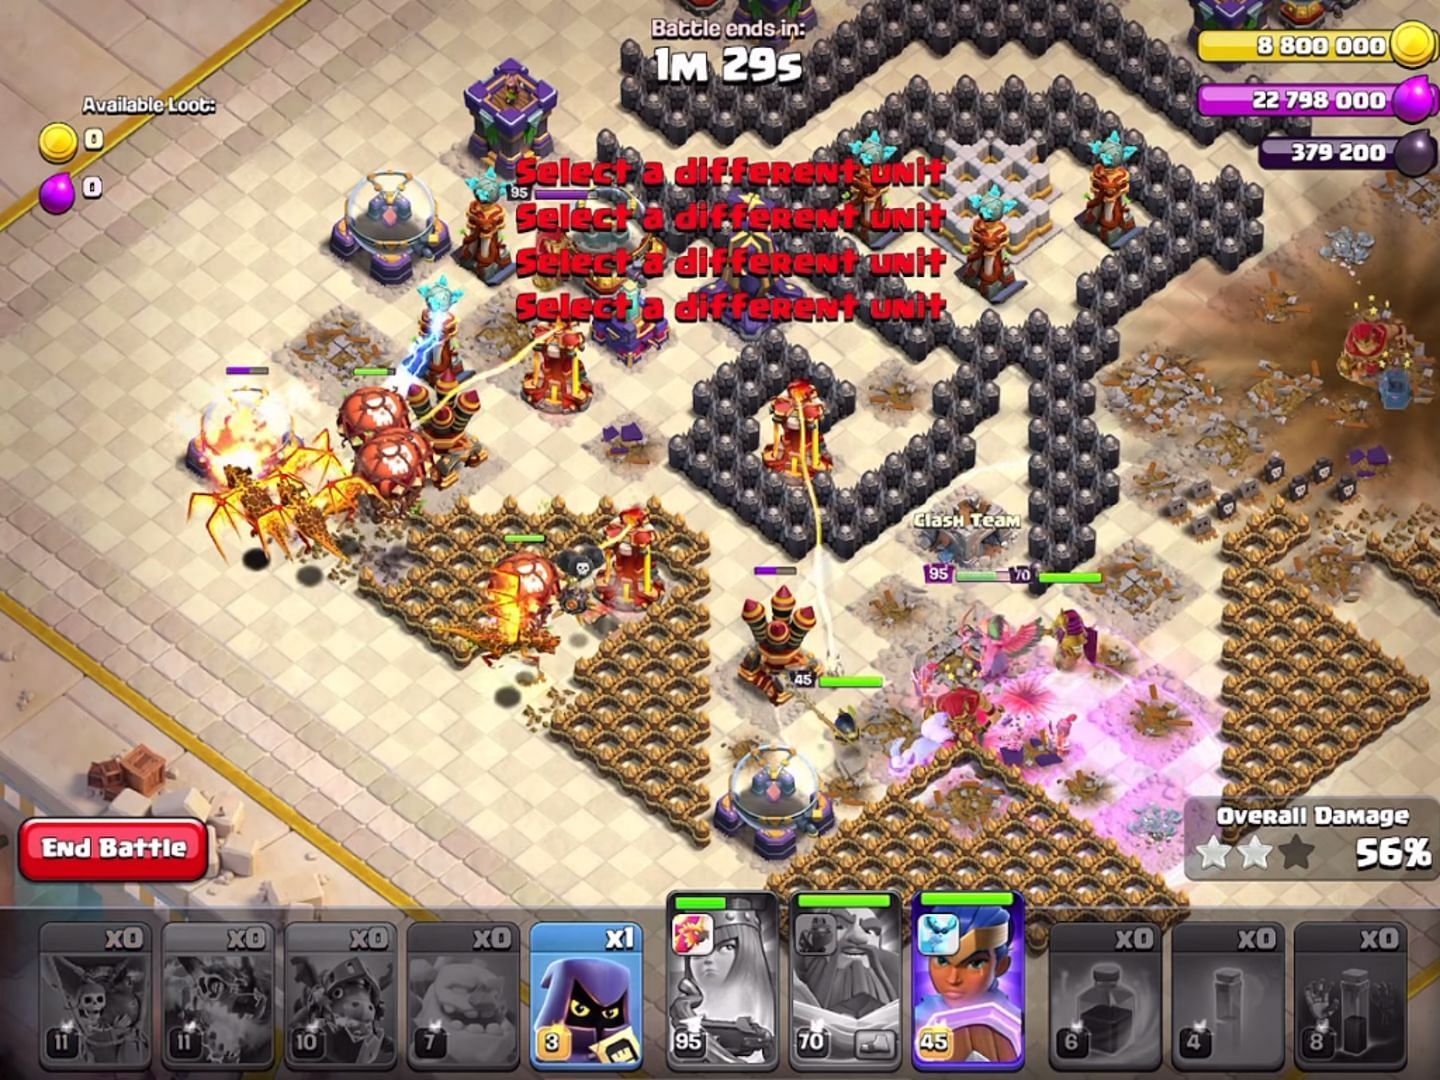 All-out attack (Image via Supercell)